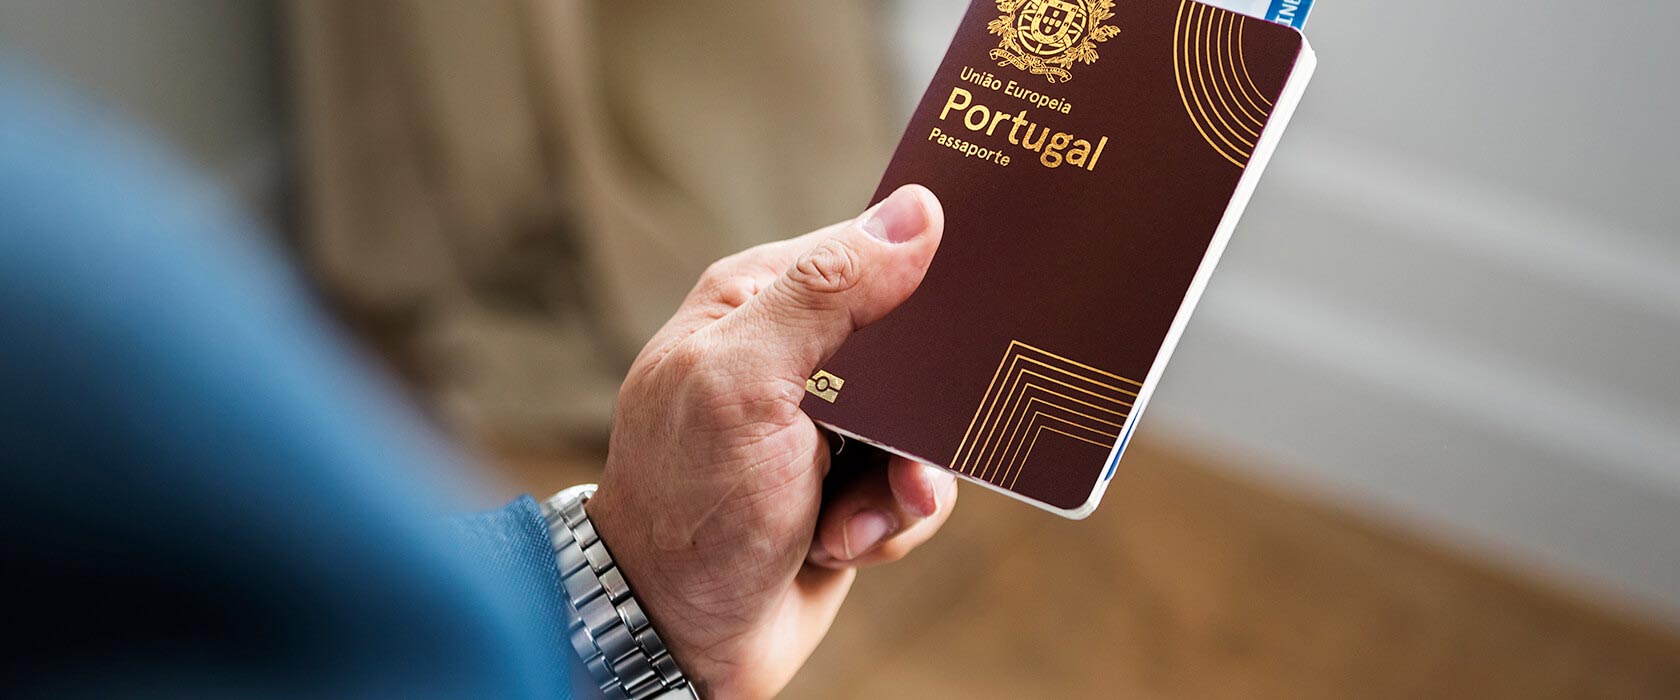 Portugal Golden Visa: A Complete Step-by-Step Guide 2023